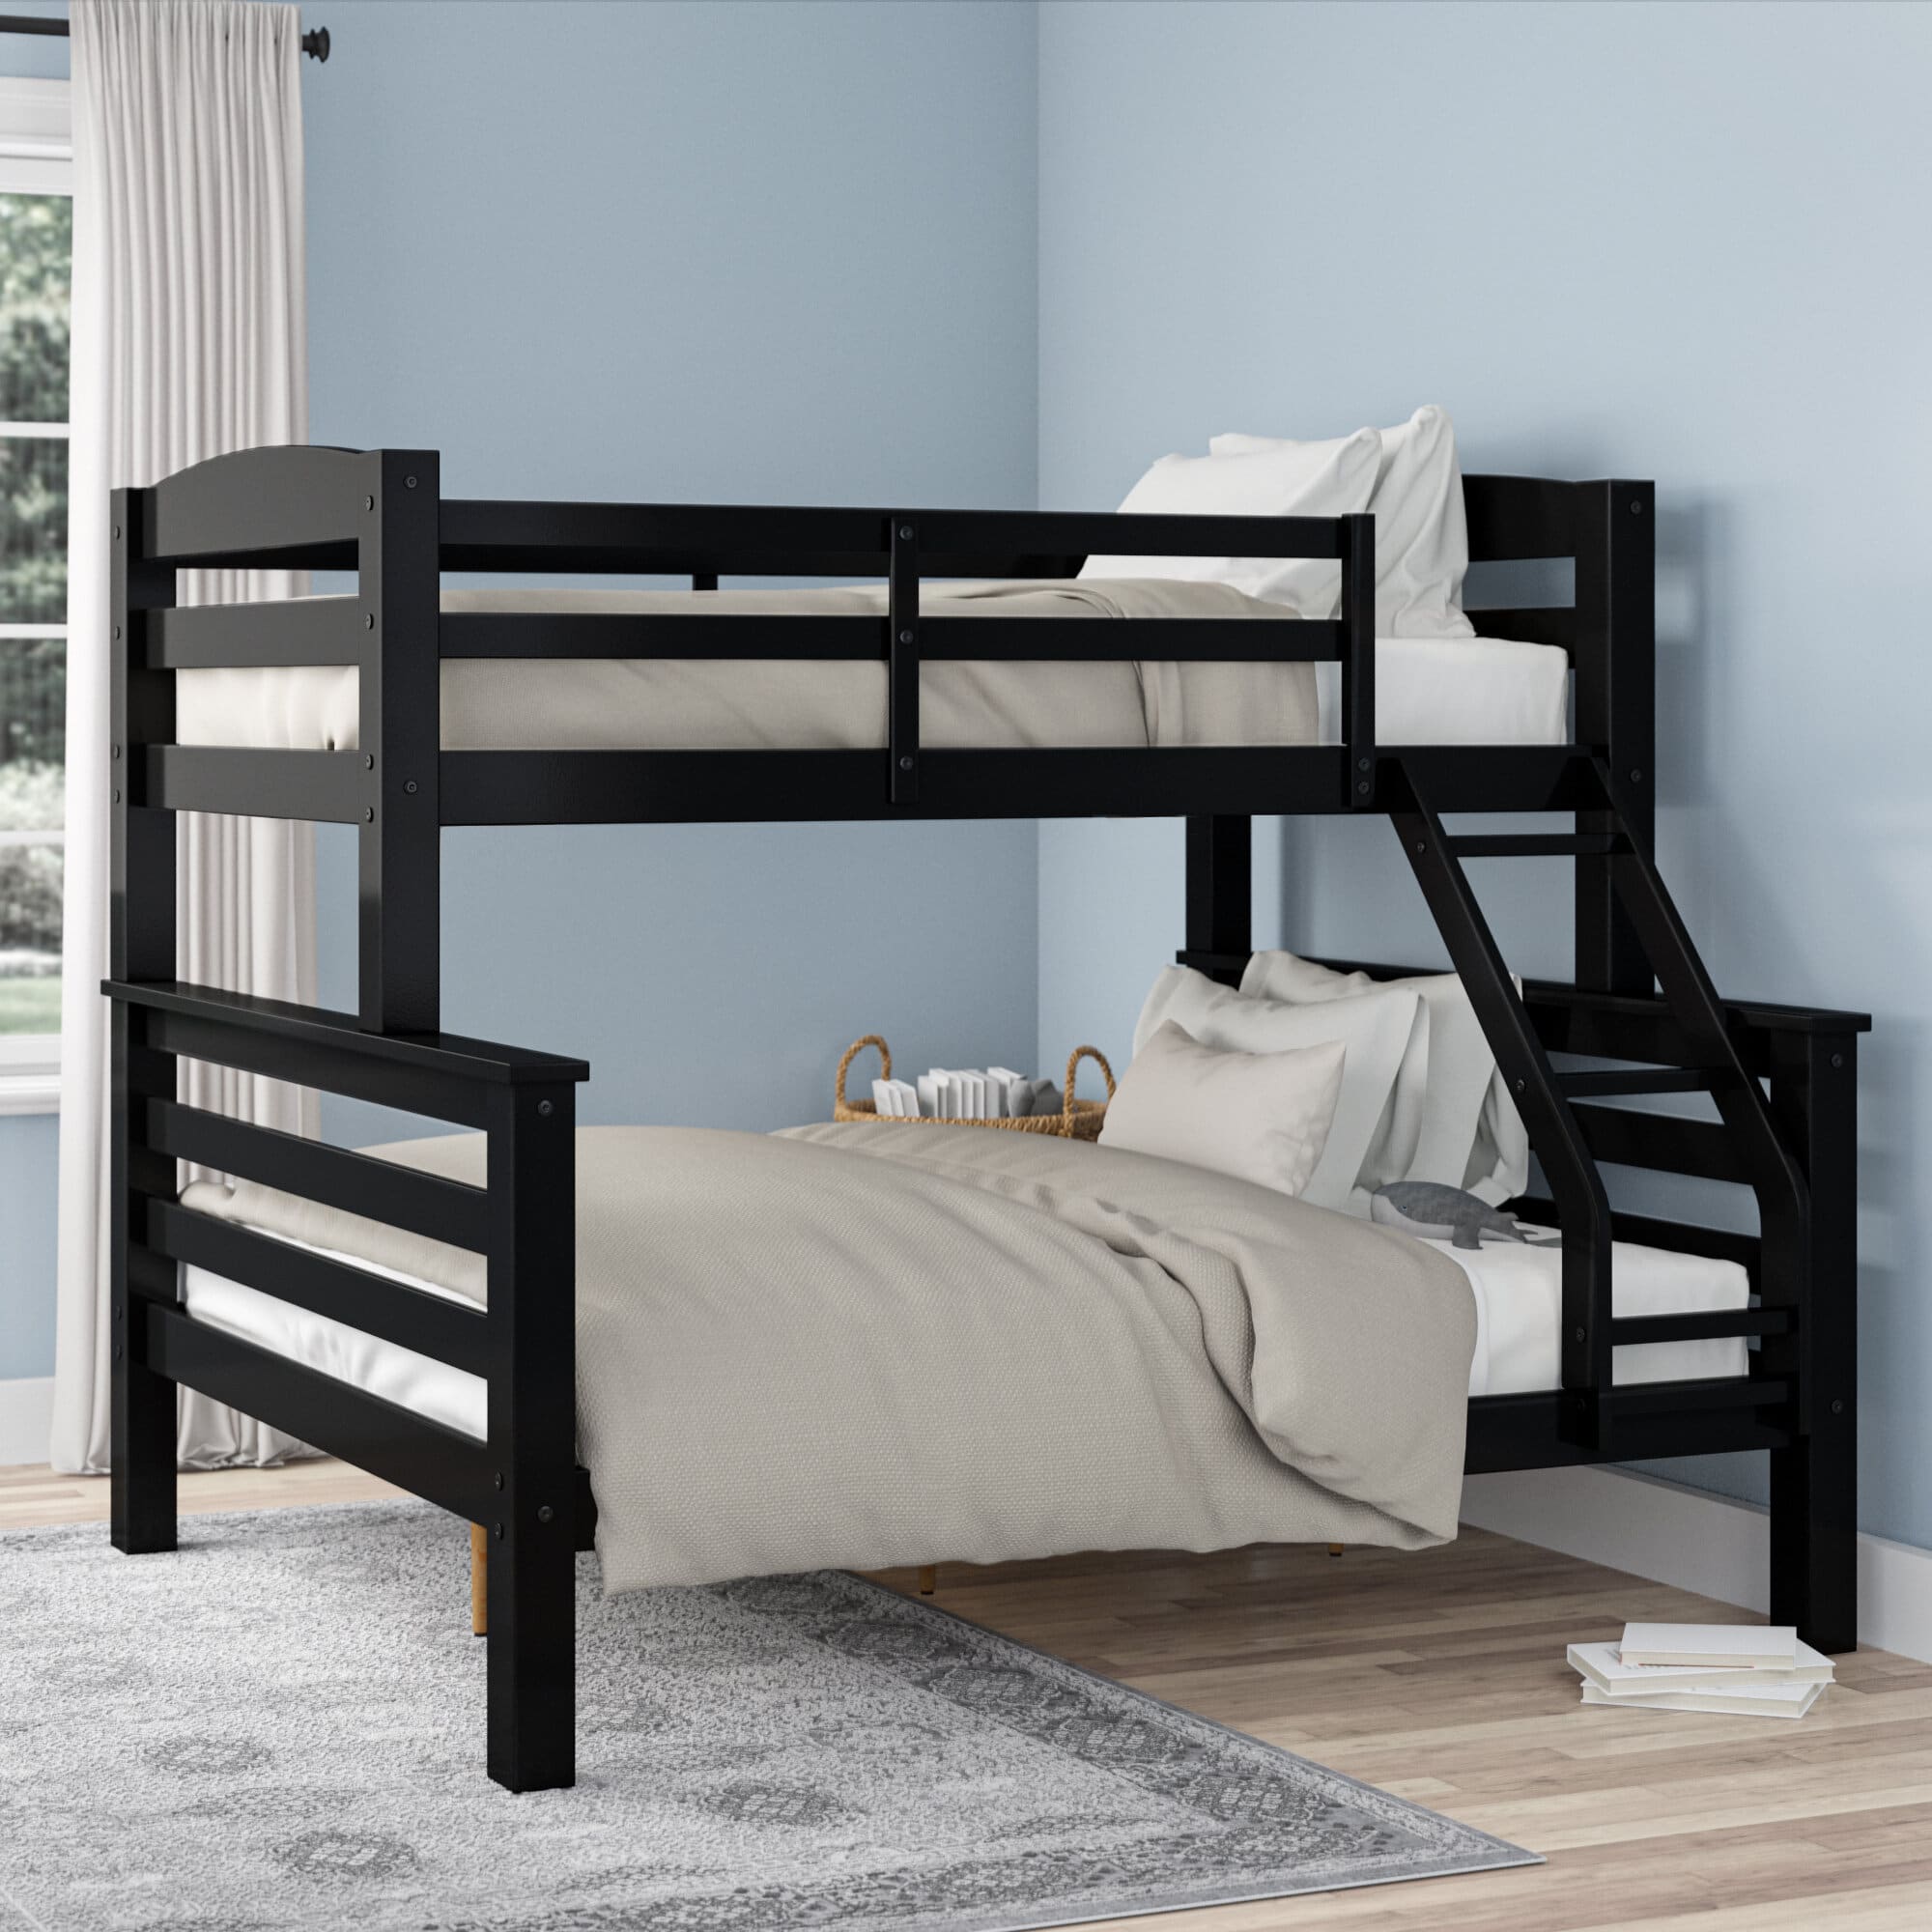 6 Best Twin Over Full Bunk Beds May, Full Size Twin Bunk Bed